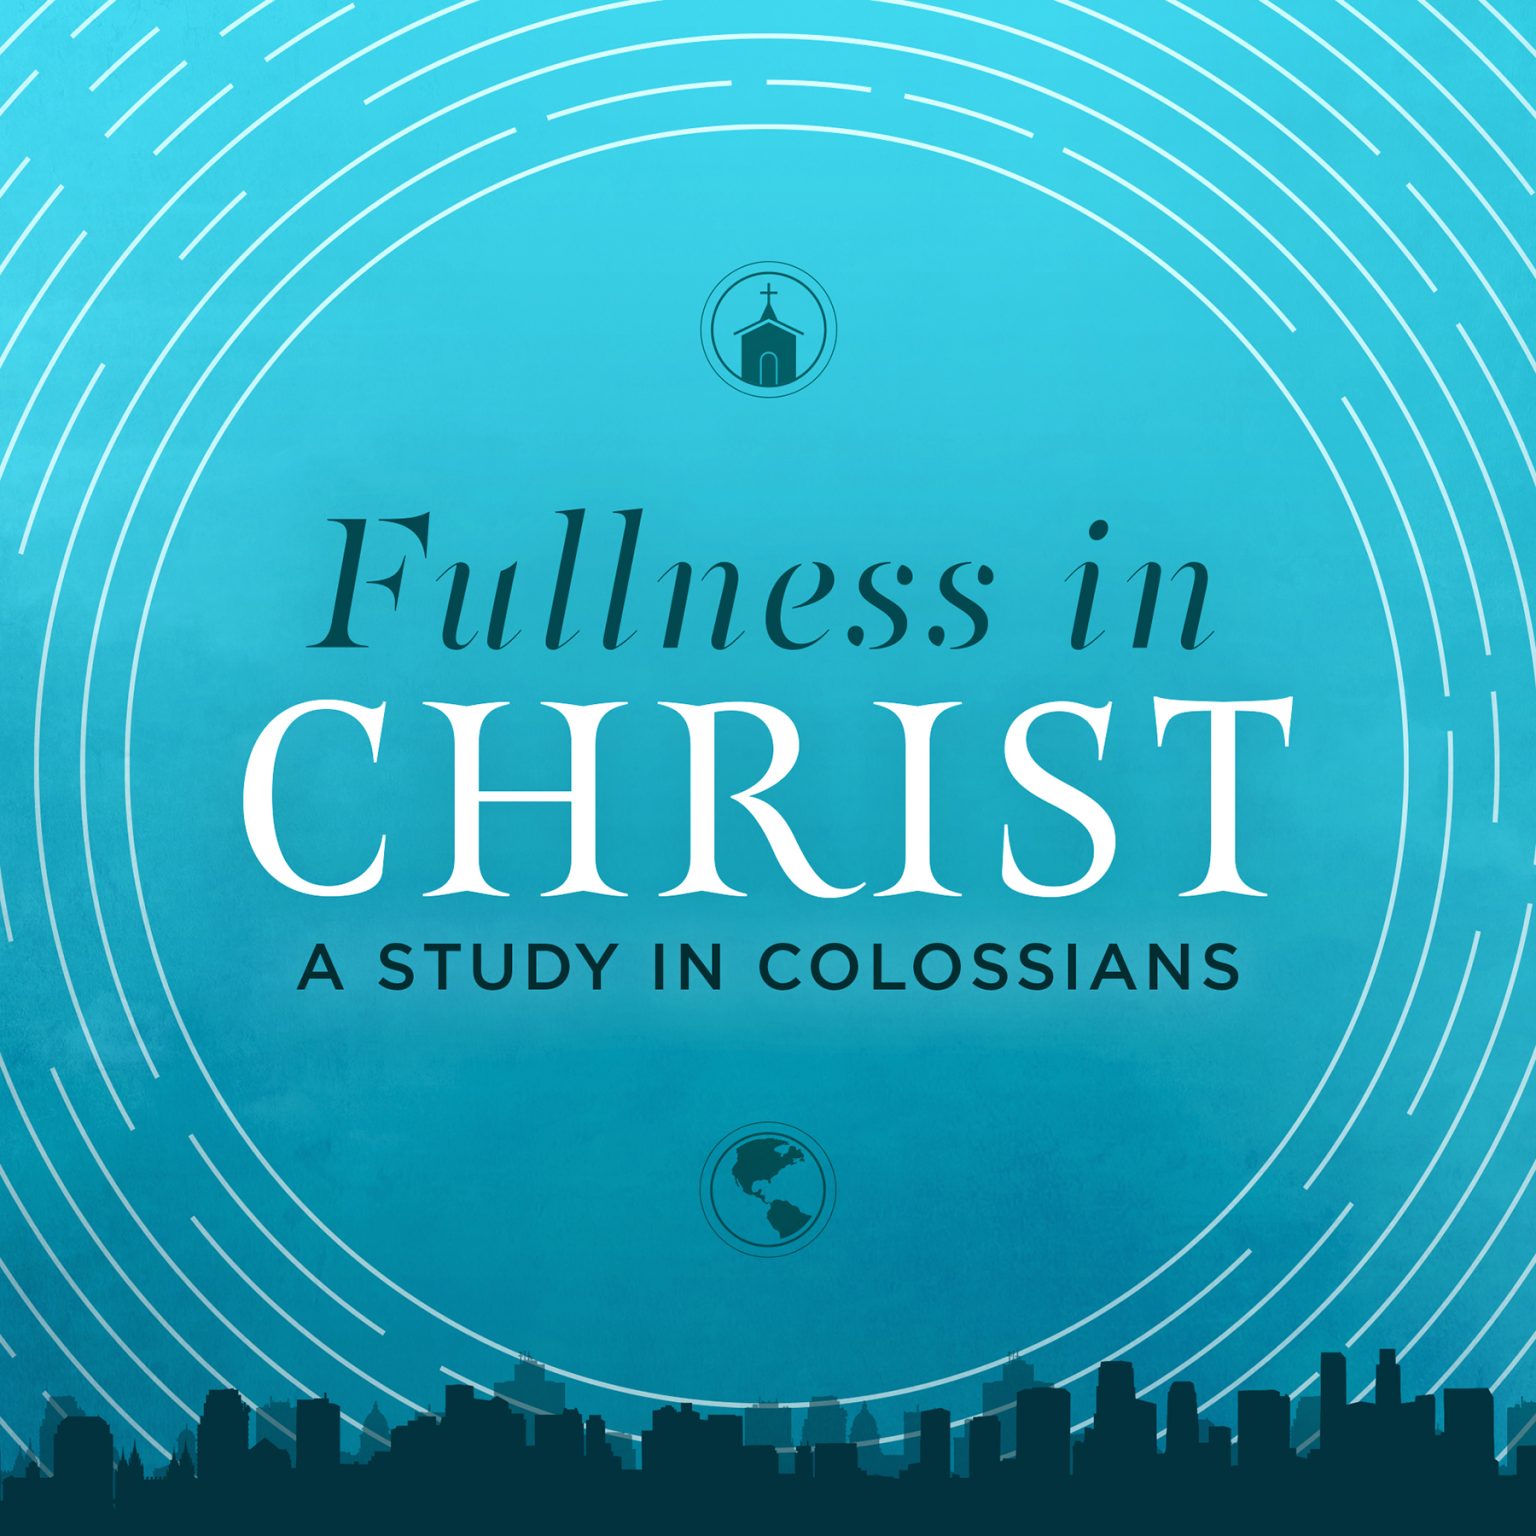 Fullness in Christ: A Study in Colossians